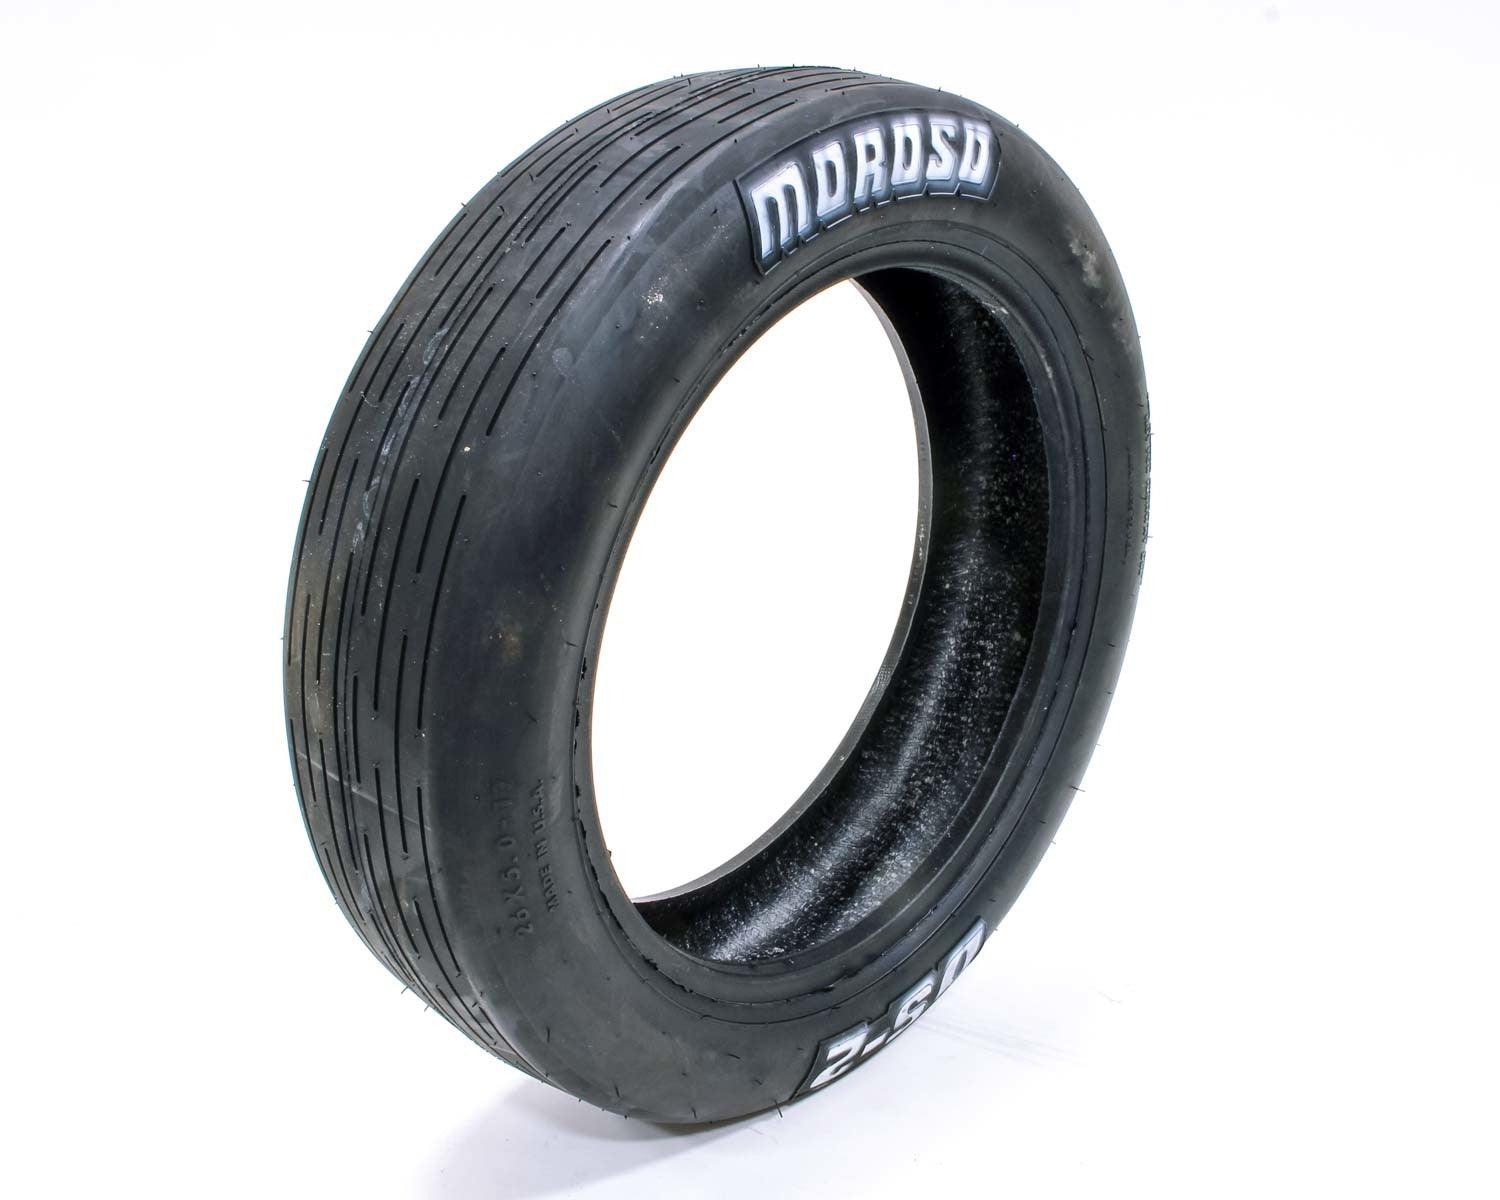 26.0/5.0-17 DS-2 Front Drag Tire - Burlile Performance Products